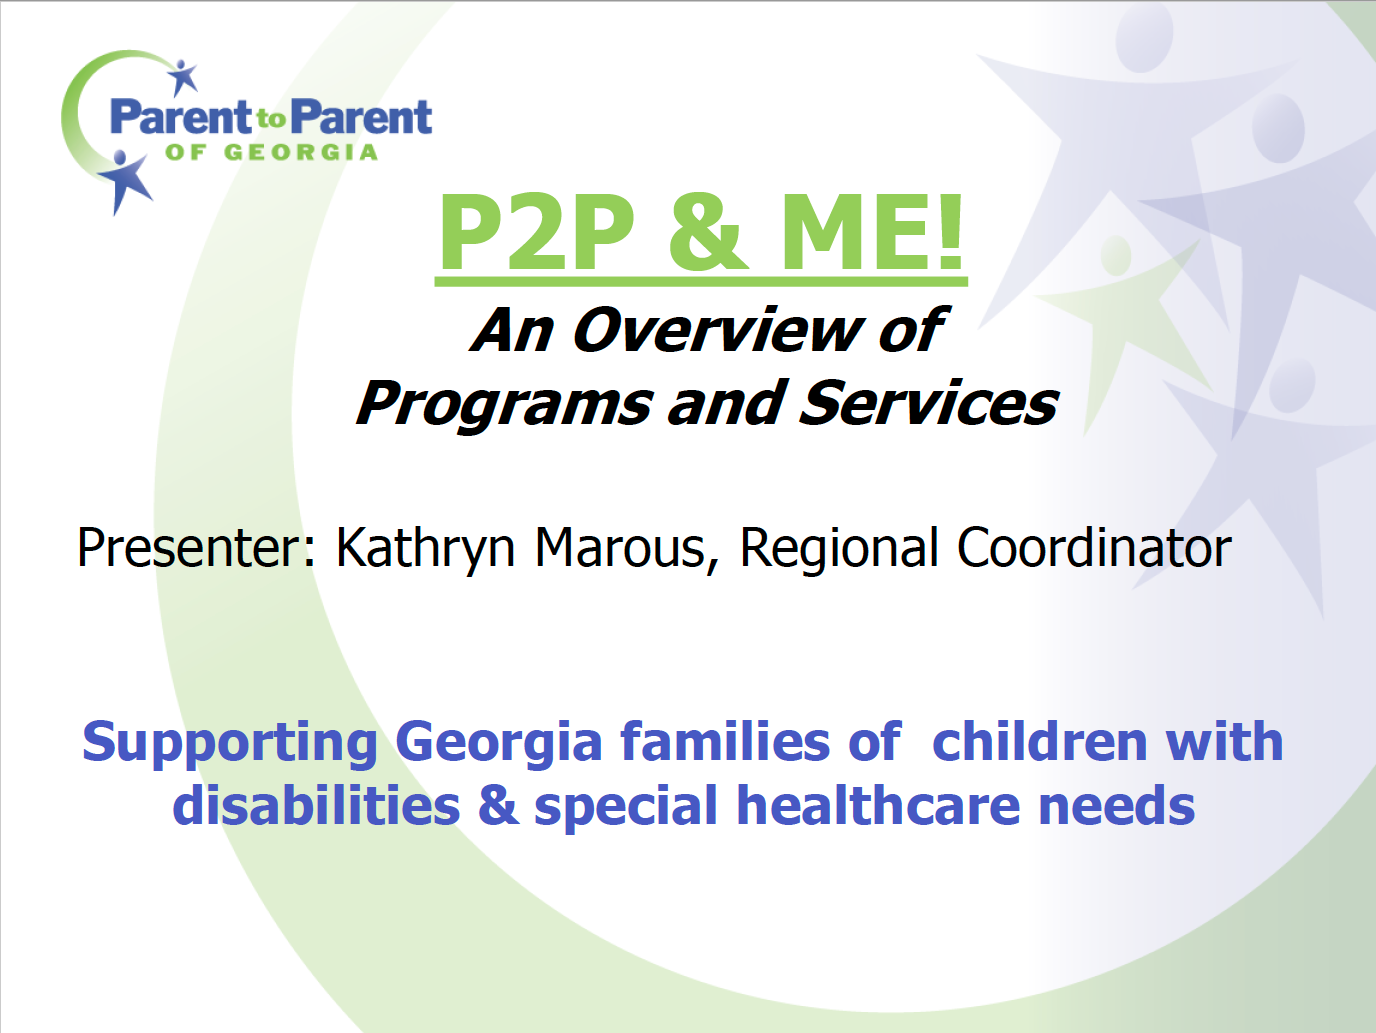 P2P & Me: An Overview of Programs and Services